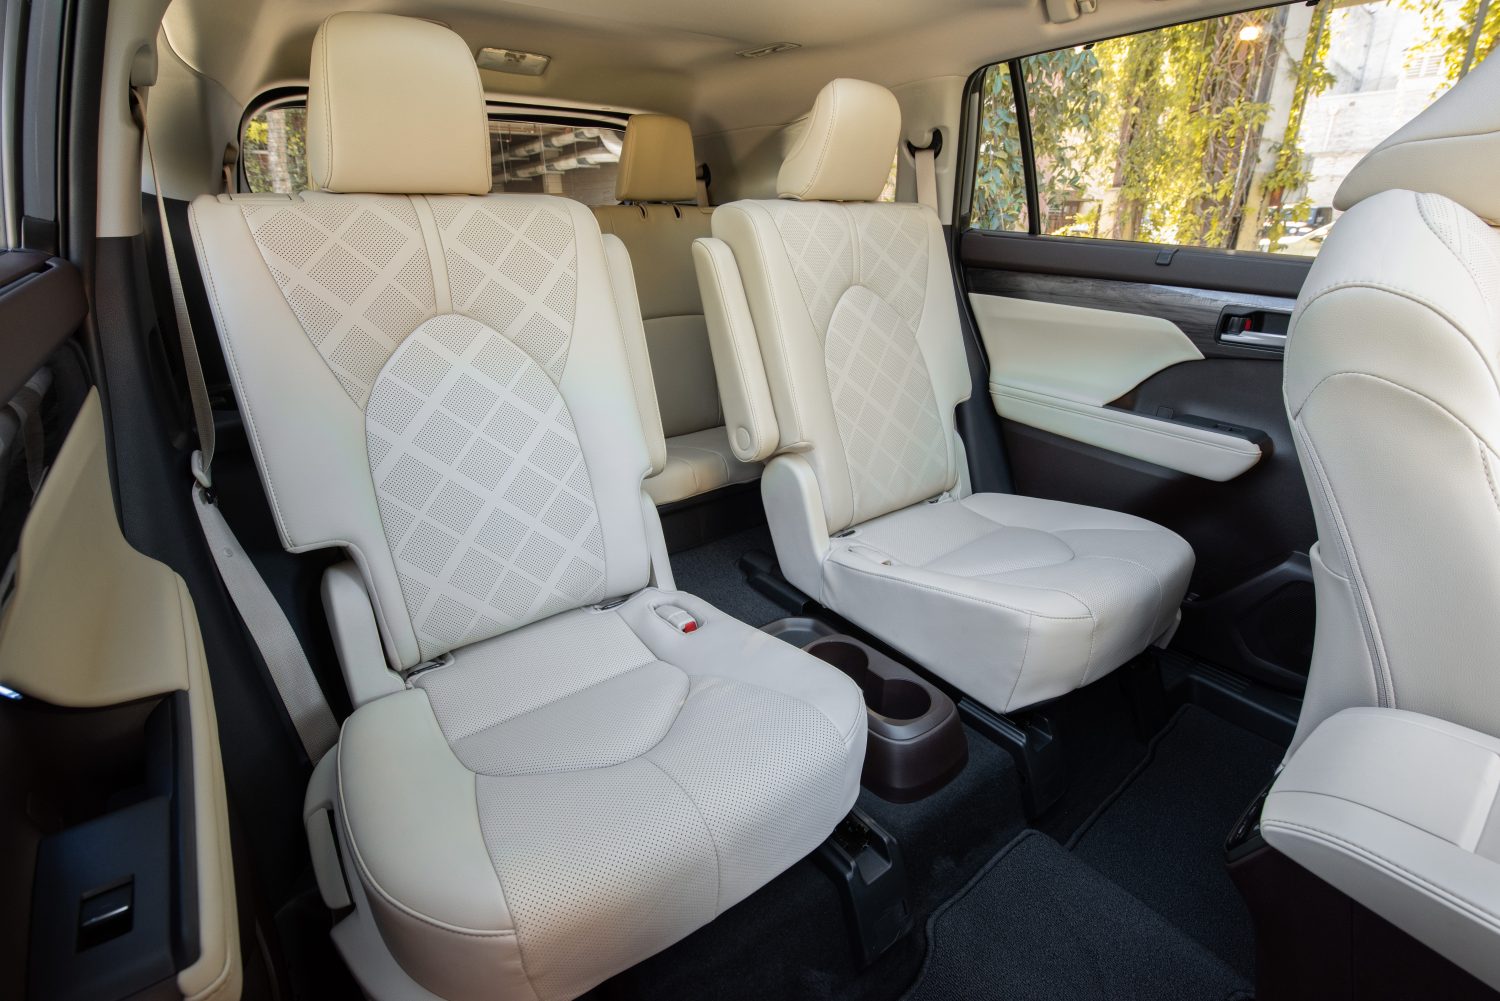 The roomy interior of a Toyota Highlander crossover SUV finished in white leather.